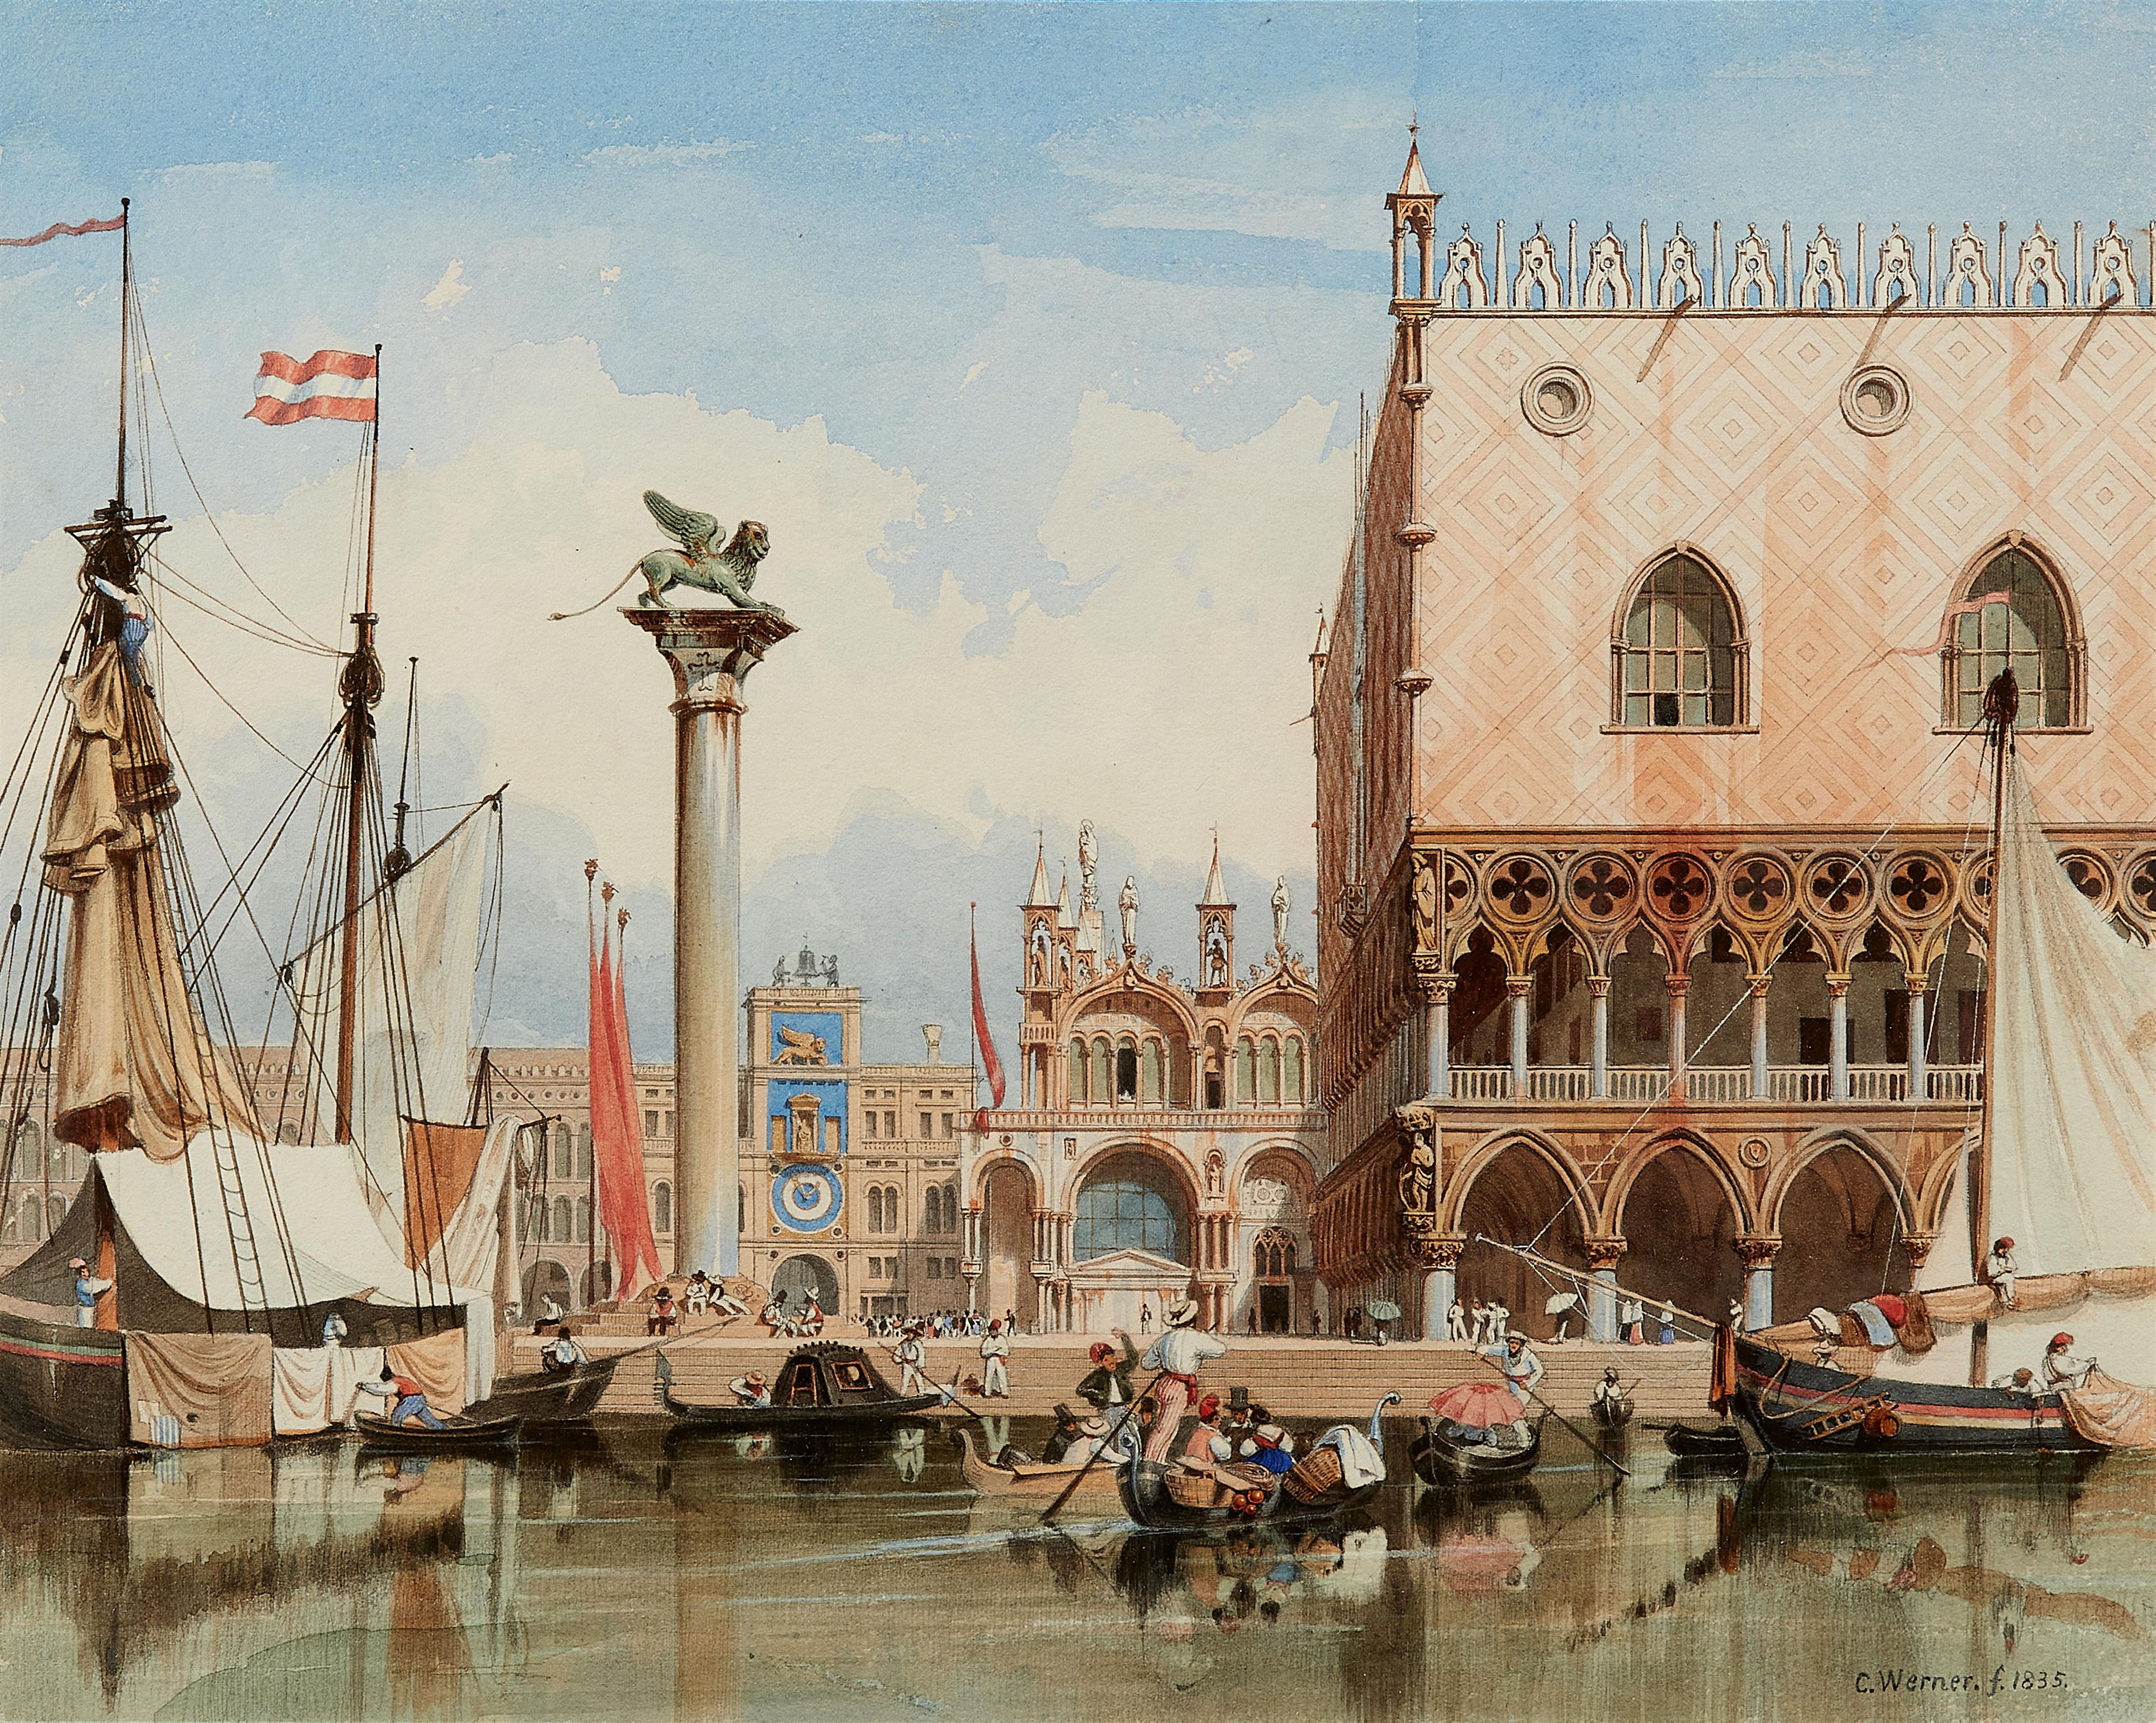 Carl Friedrich Heinrich Werner - View of Venice with the Doge's Palace and the Basilica di San Marco - image-1